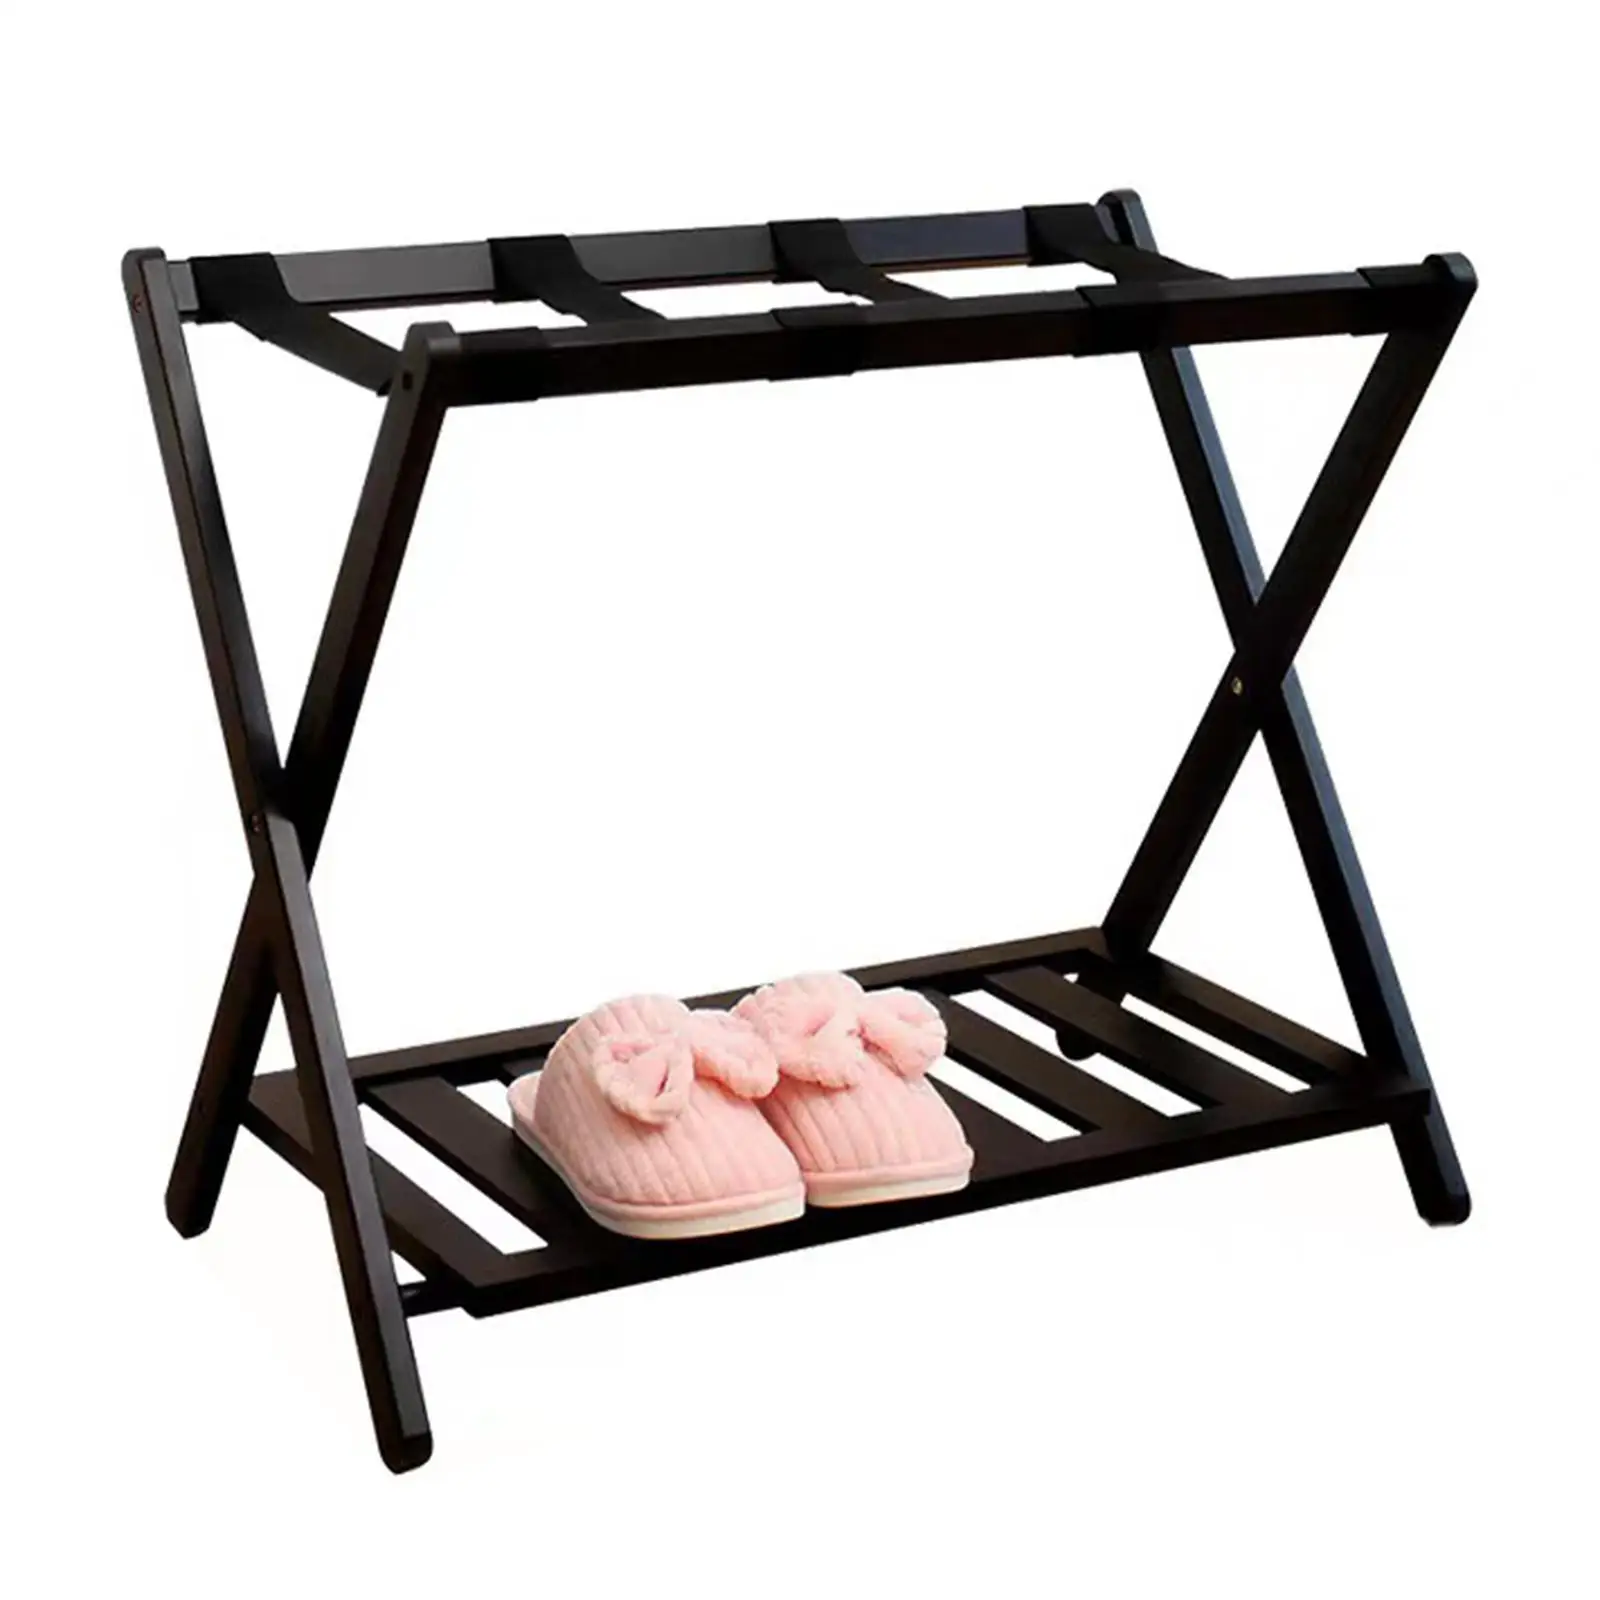 Multifunctional Luggage Rack Foldable Suitcase Stand for Hotel Travel Room Furniture